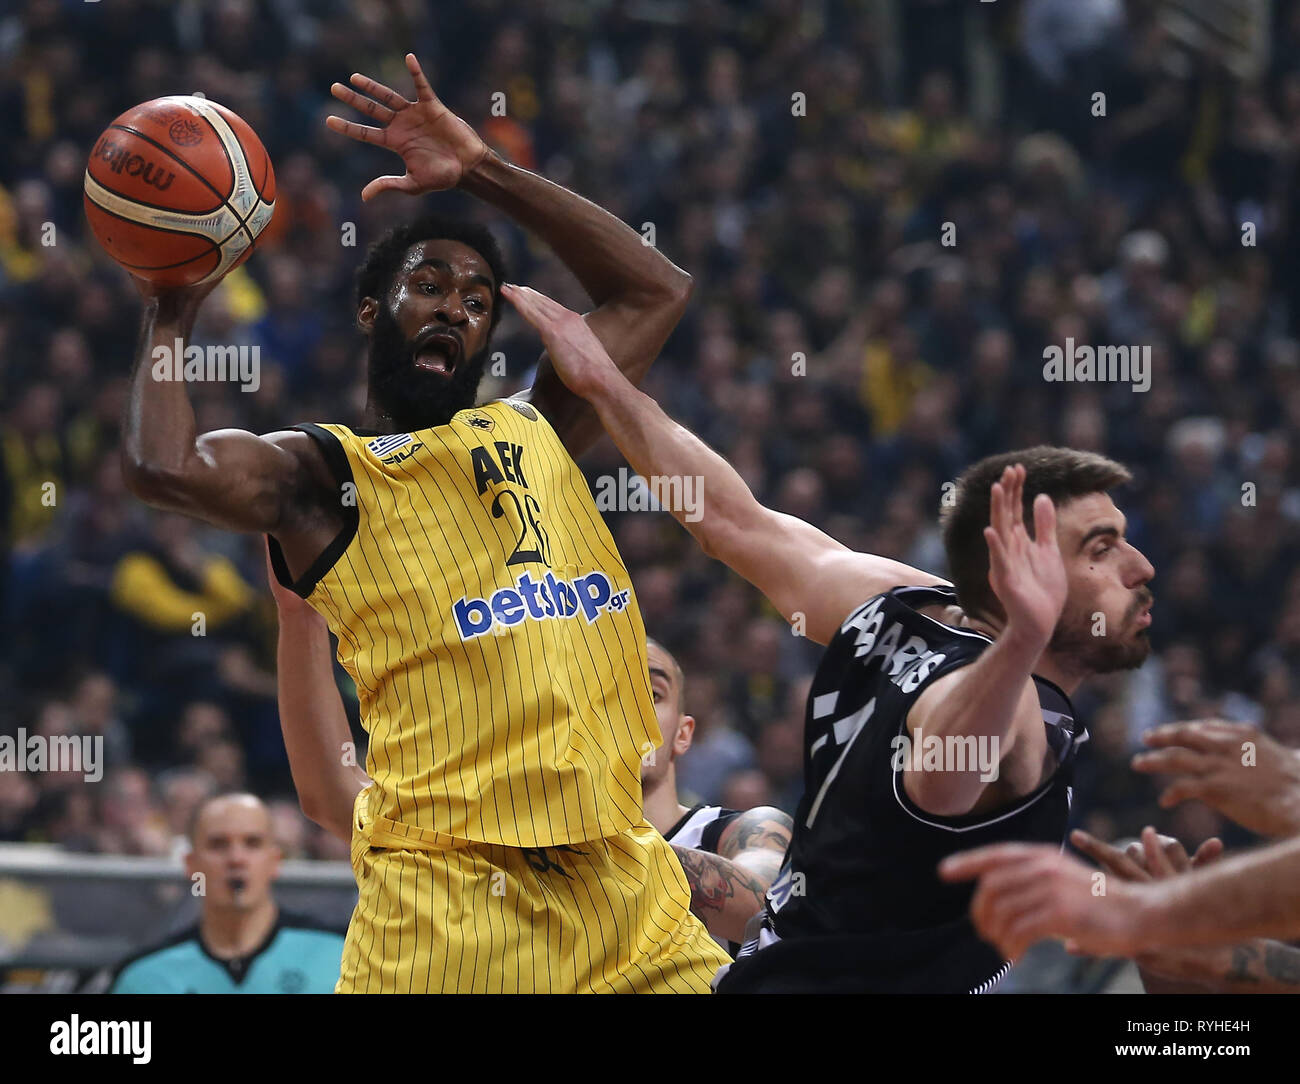 Athens, Greece. 13th Mar, 2019. Howard Sant-Roos (L) of AEK Athens competes  with Milenco Tepic of PAOK Thessaloniki during the 1/8 finals second leg at  Basketball Champions League tournament in Athens, Greece,